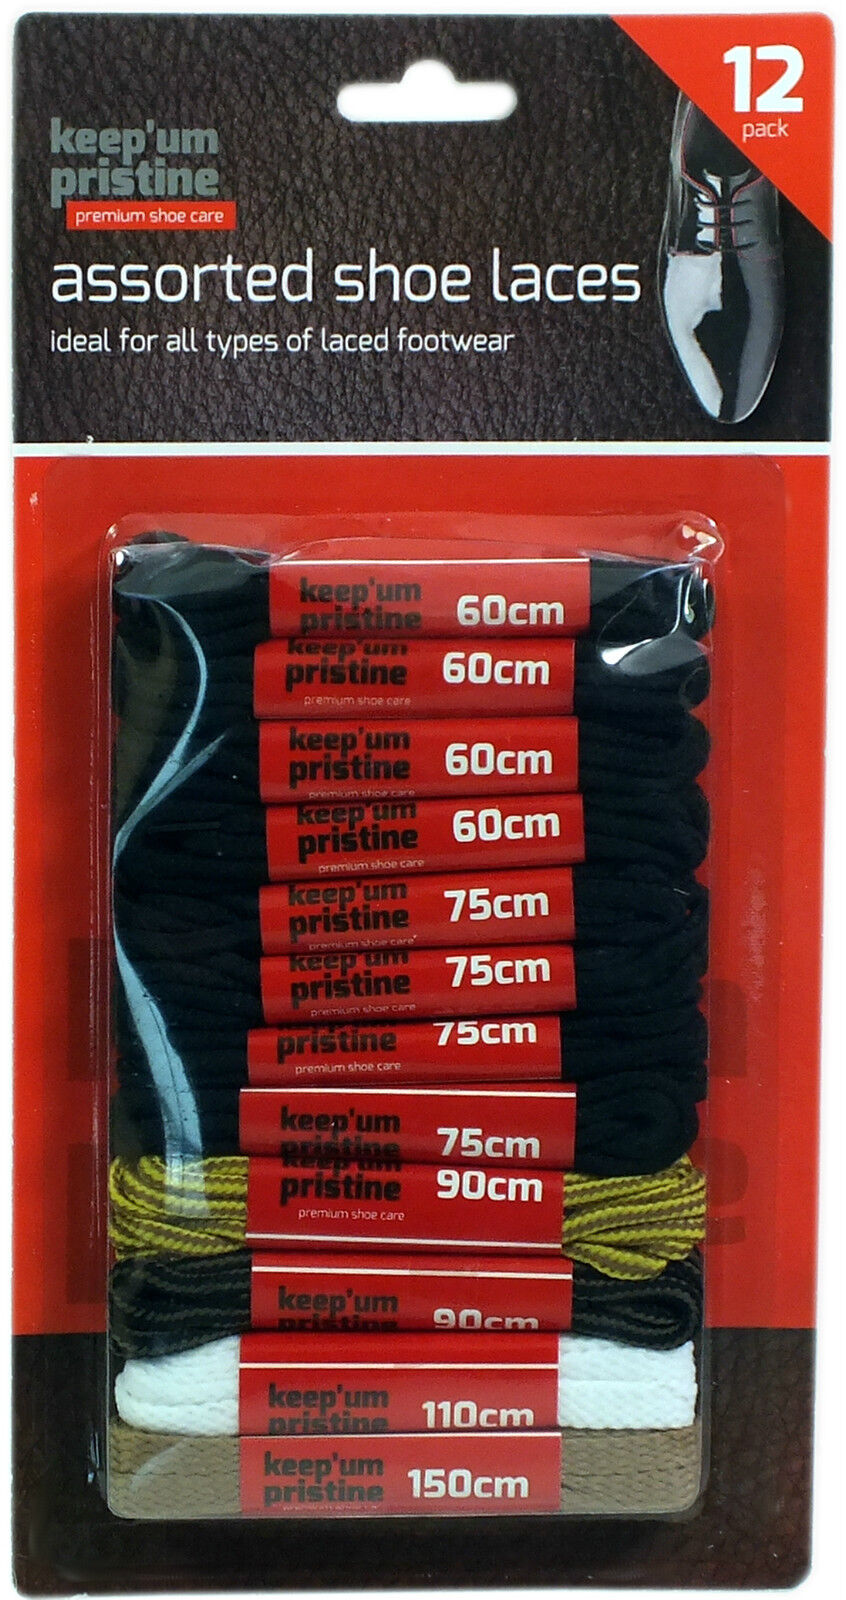 12 Shoe Laces in 5 Assorted Sizes & Colours Black, White & Light Brown